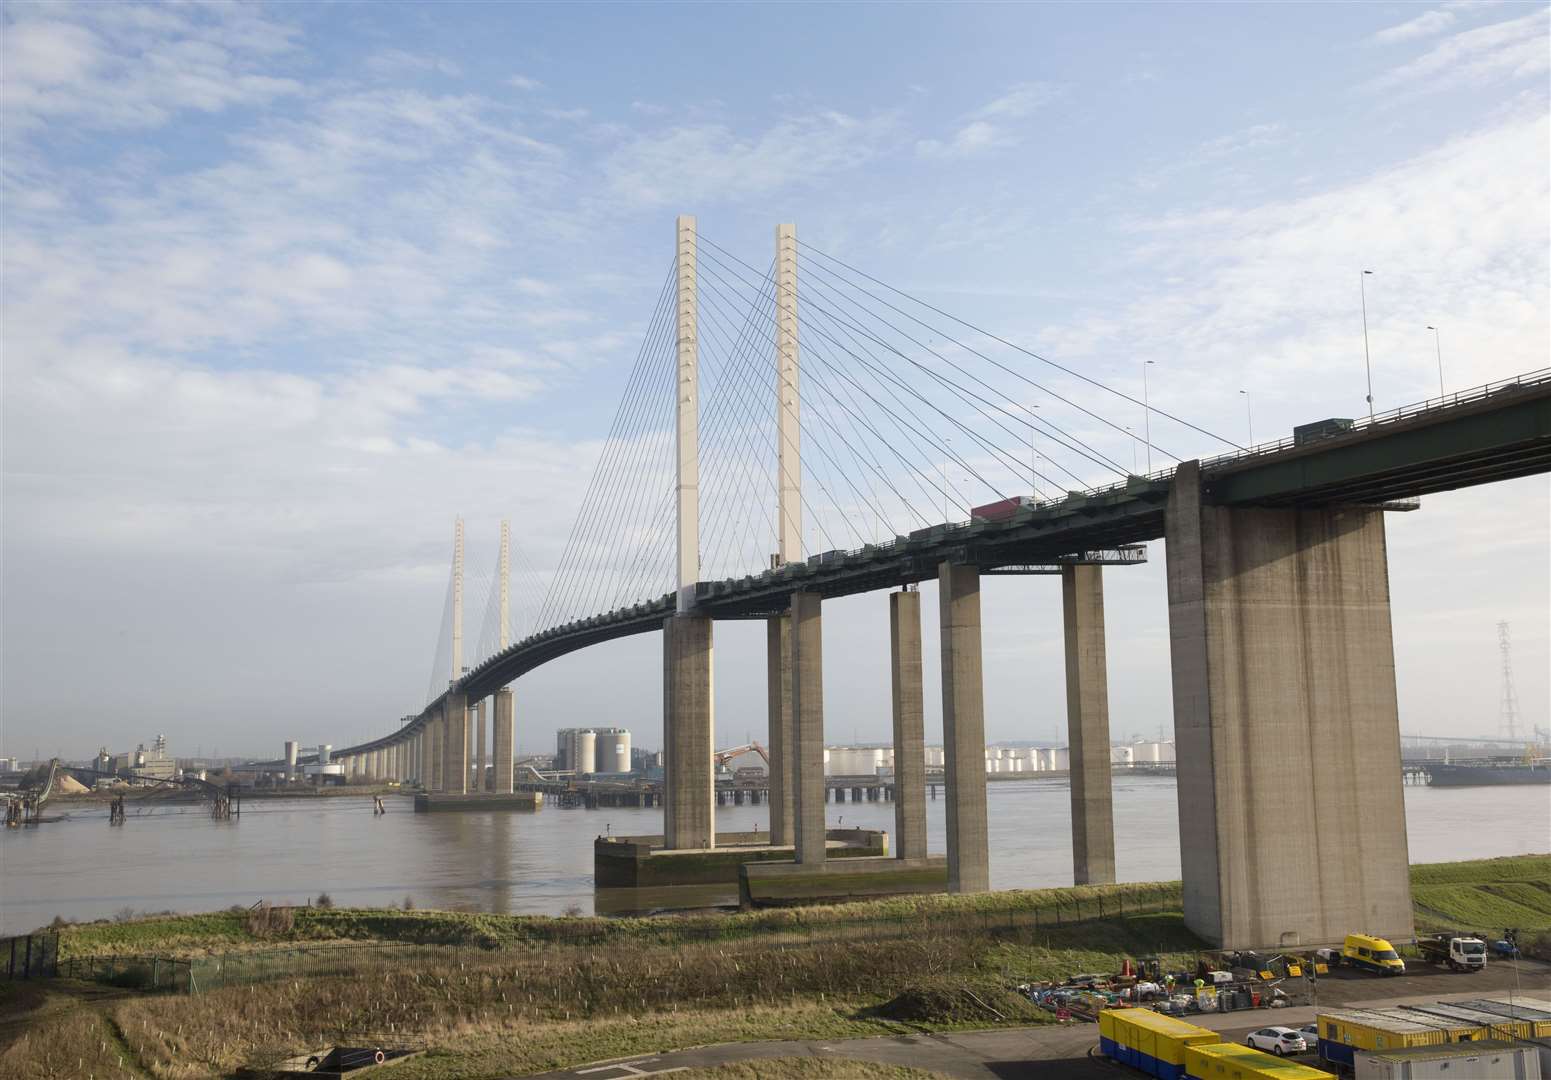 Three men were arrested near the Dartford Crossing Picture: Highways Agency